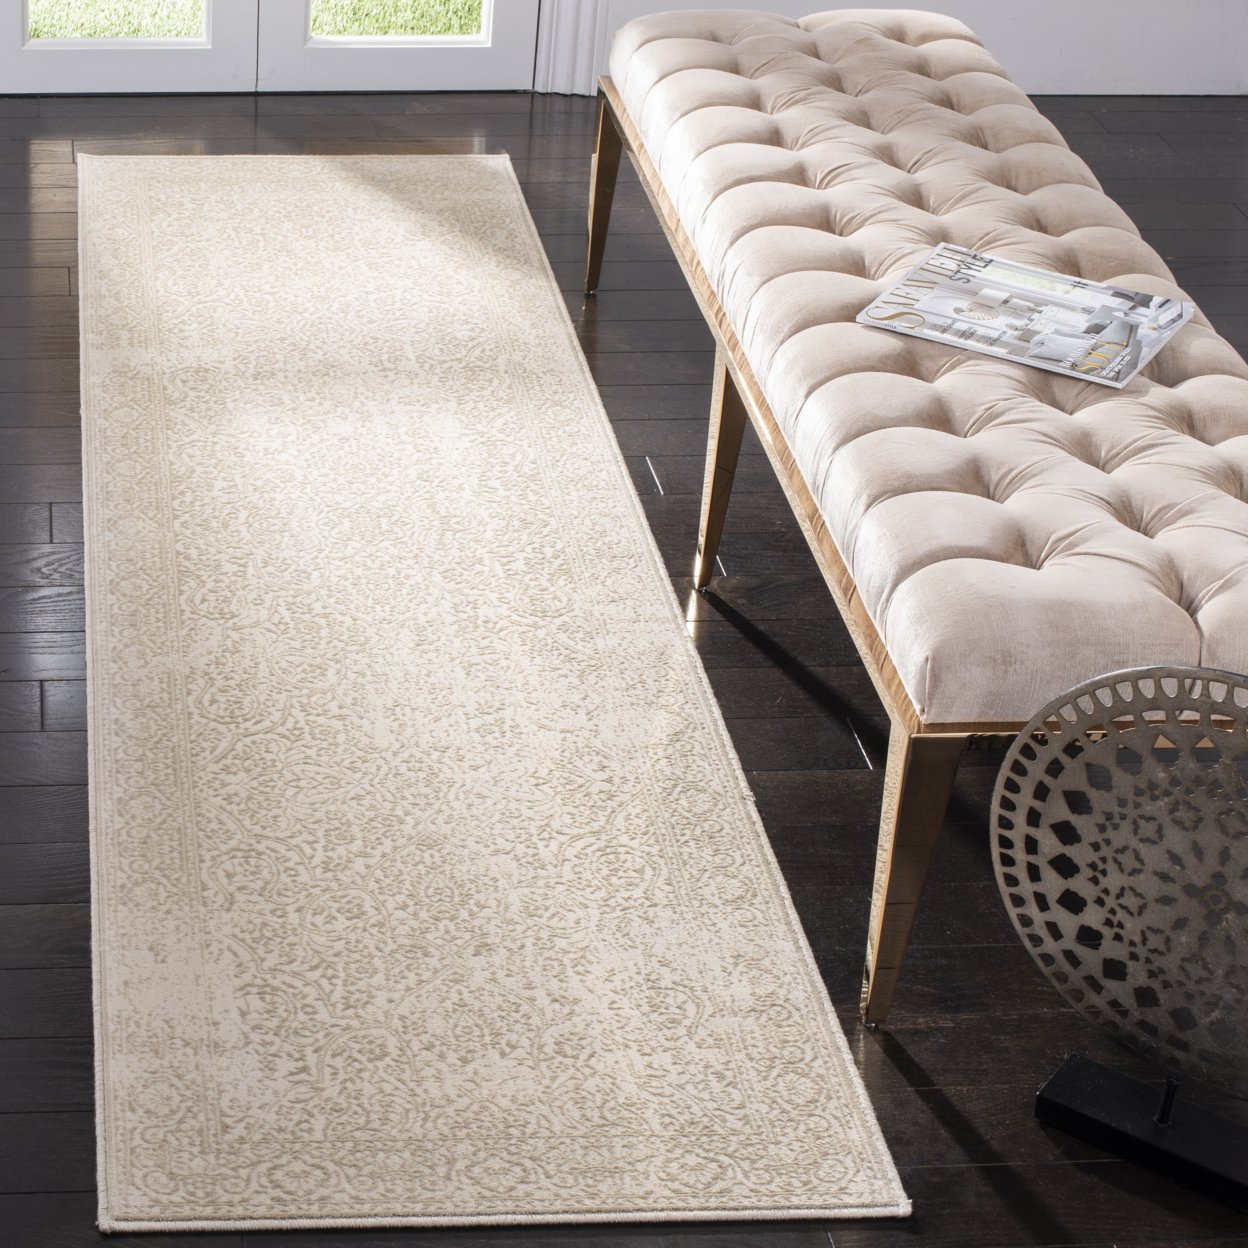 SAFAVIEH Noble Collection NBL612-5488 Beige / Ivory Rug - 4' X 5' 7